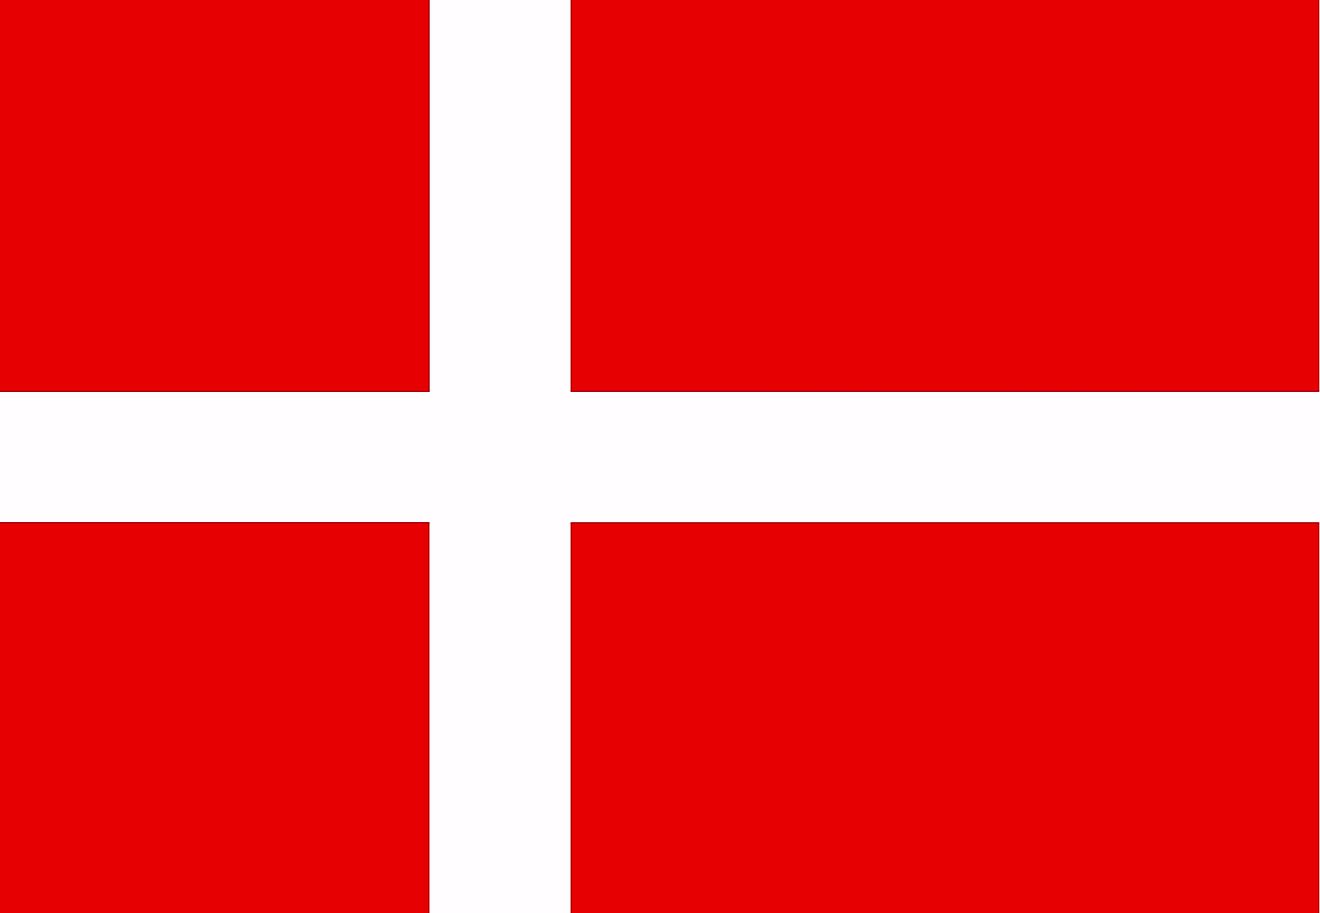 The National Flag of Denmark features a solid red field with a white Scandinavian cross that extends to the edges of the flag.